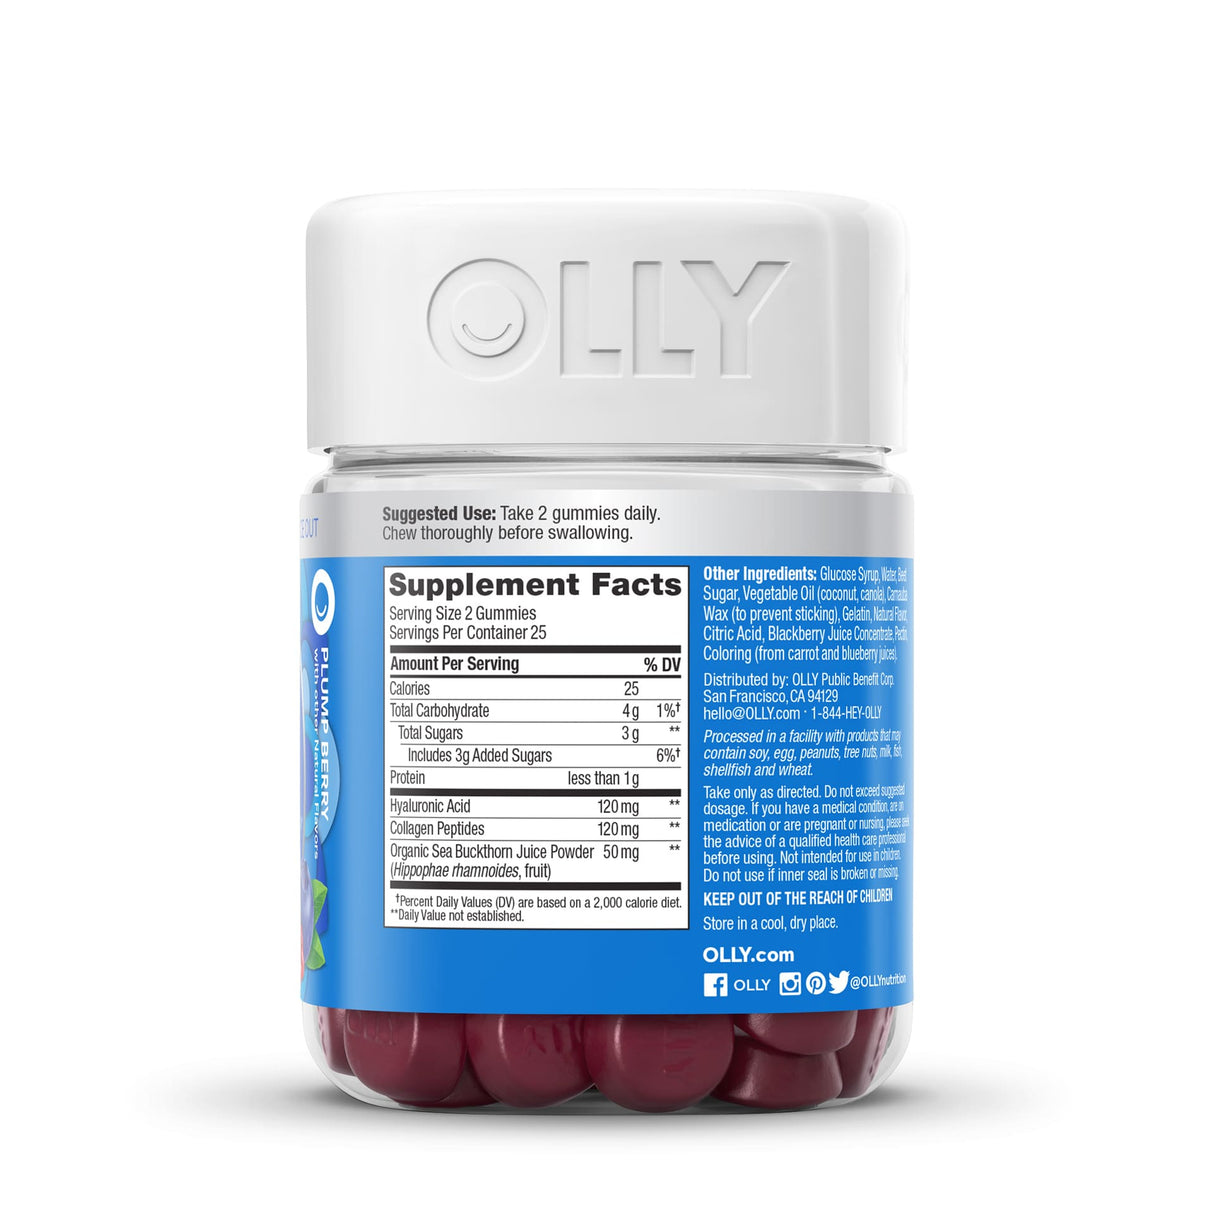 OLLY Glowing Skin with Hyaluronic Acid, Collagen & Sea Buckthorn Plump Berry Gummy Supplement (50 ct)